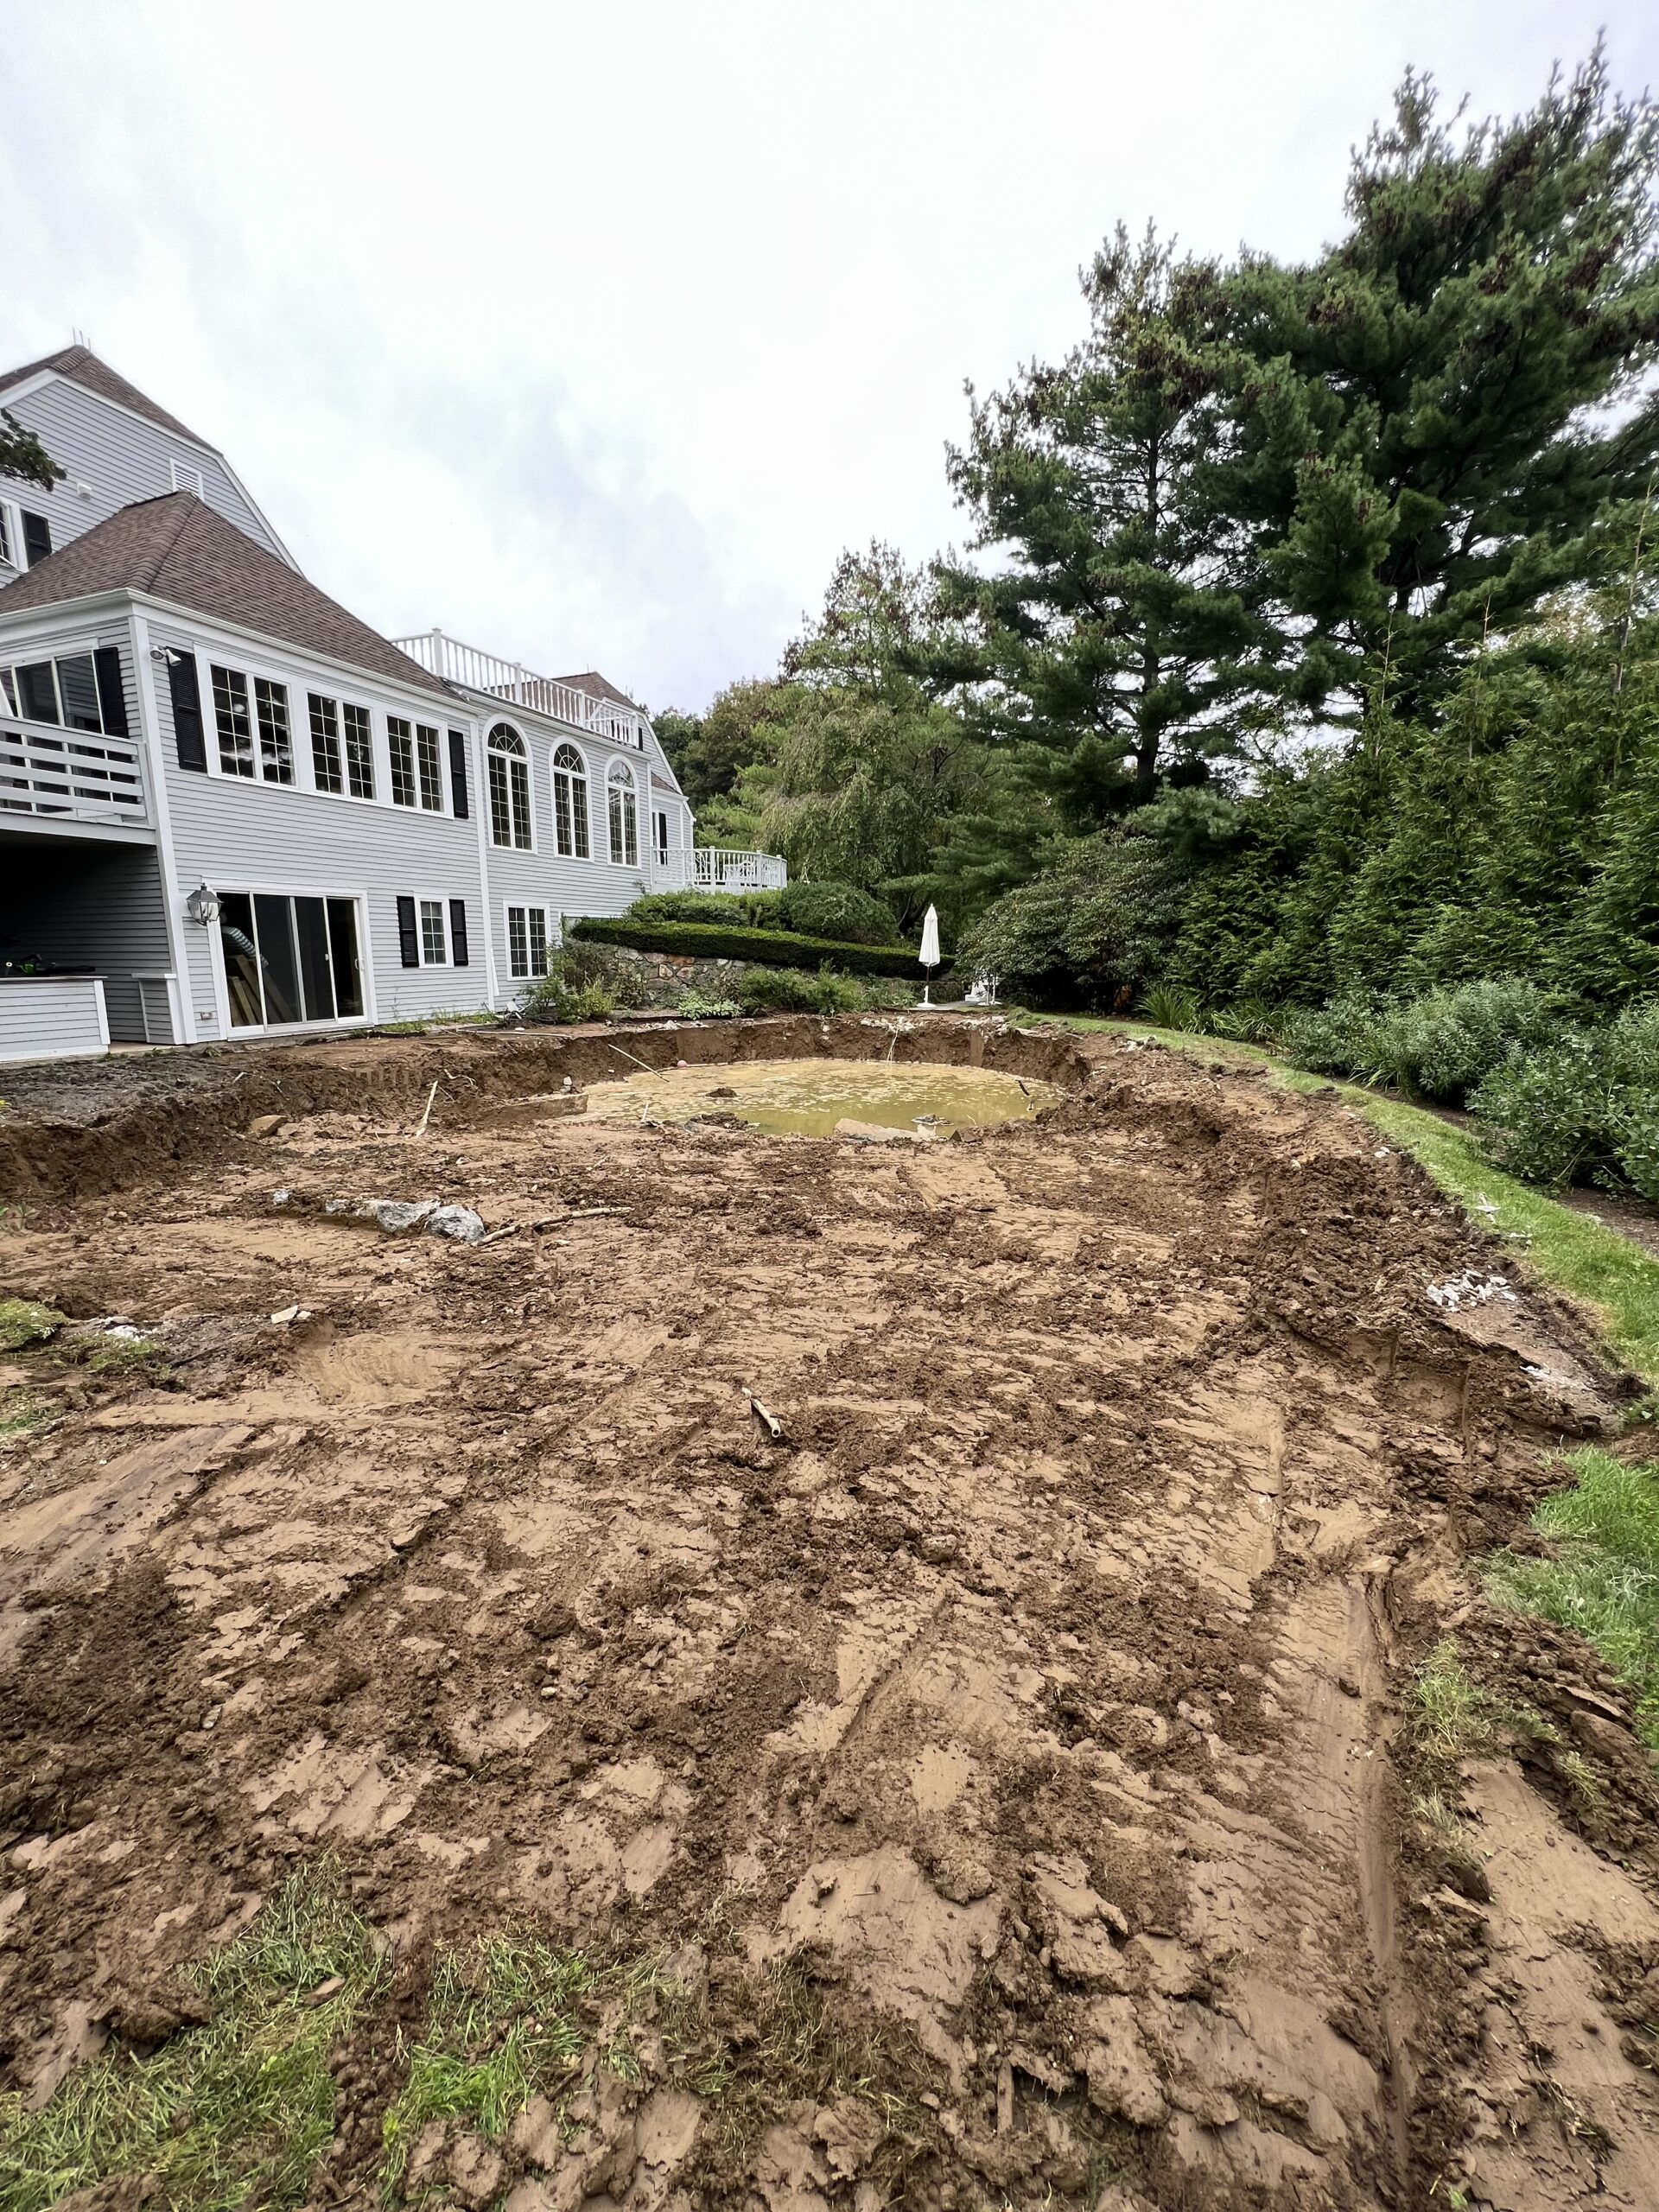 In-ground pool demolished at Wilton CT Home